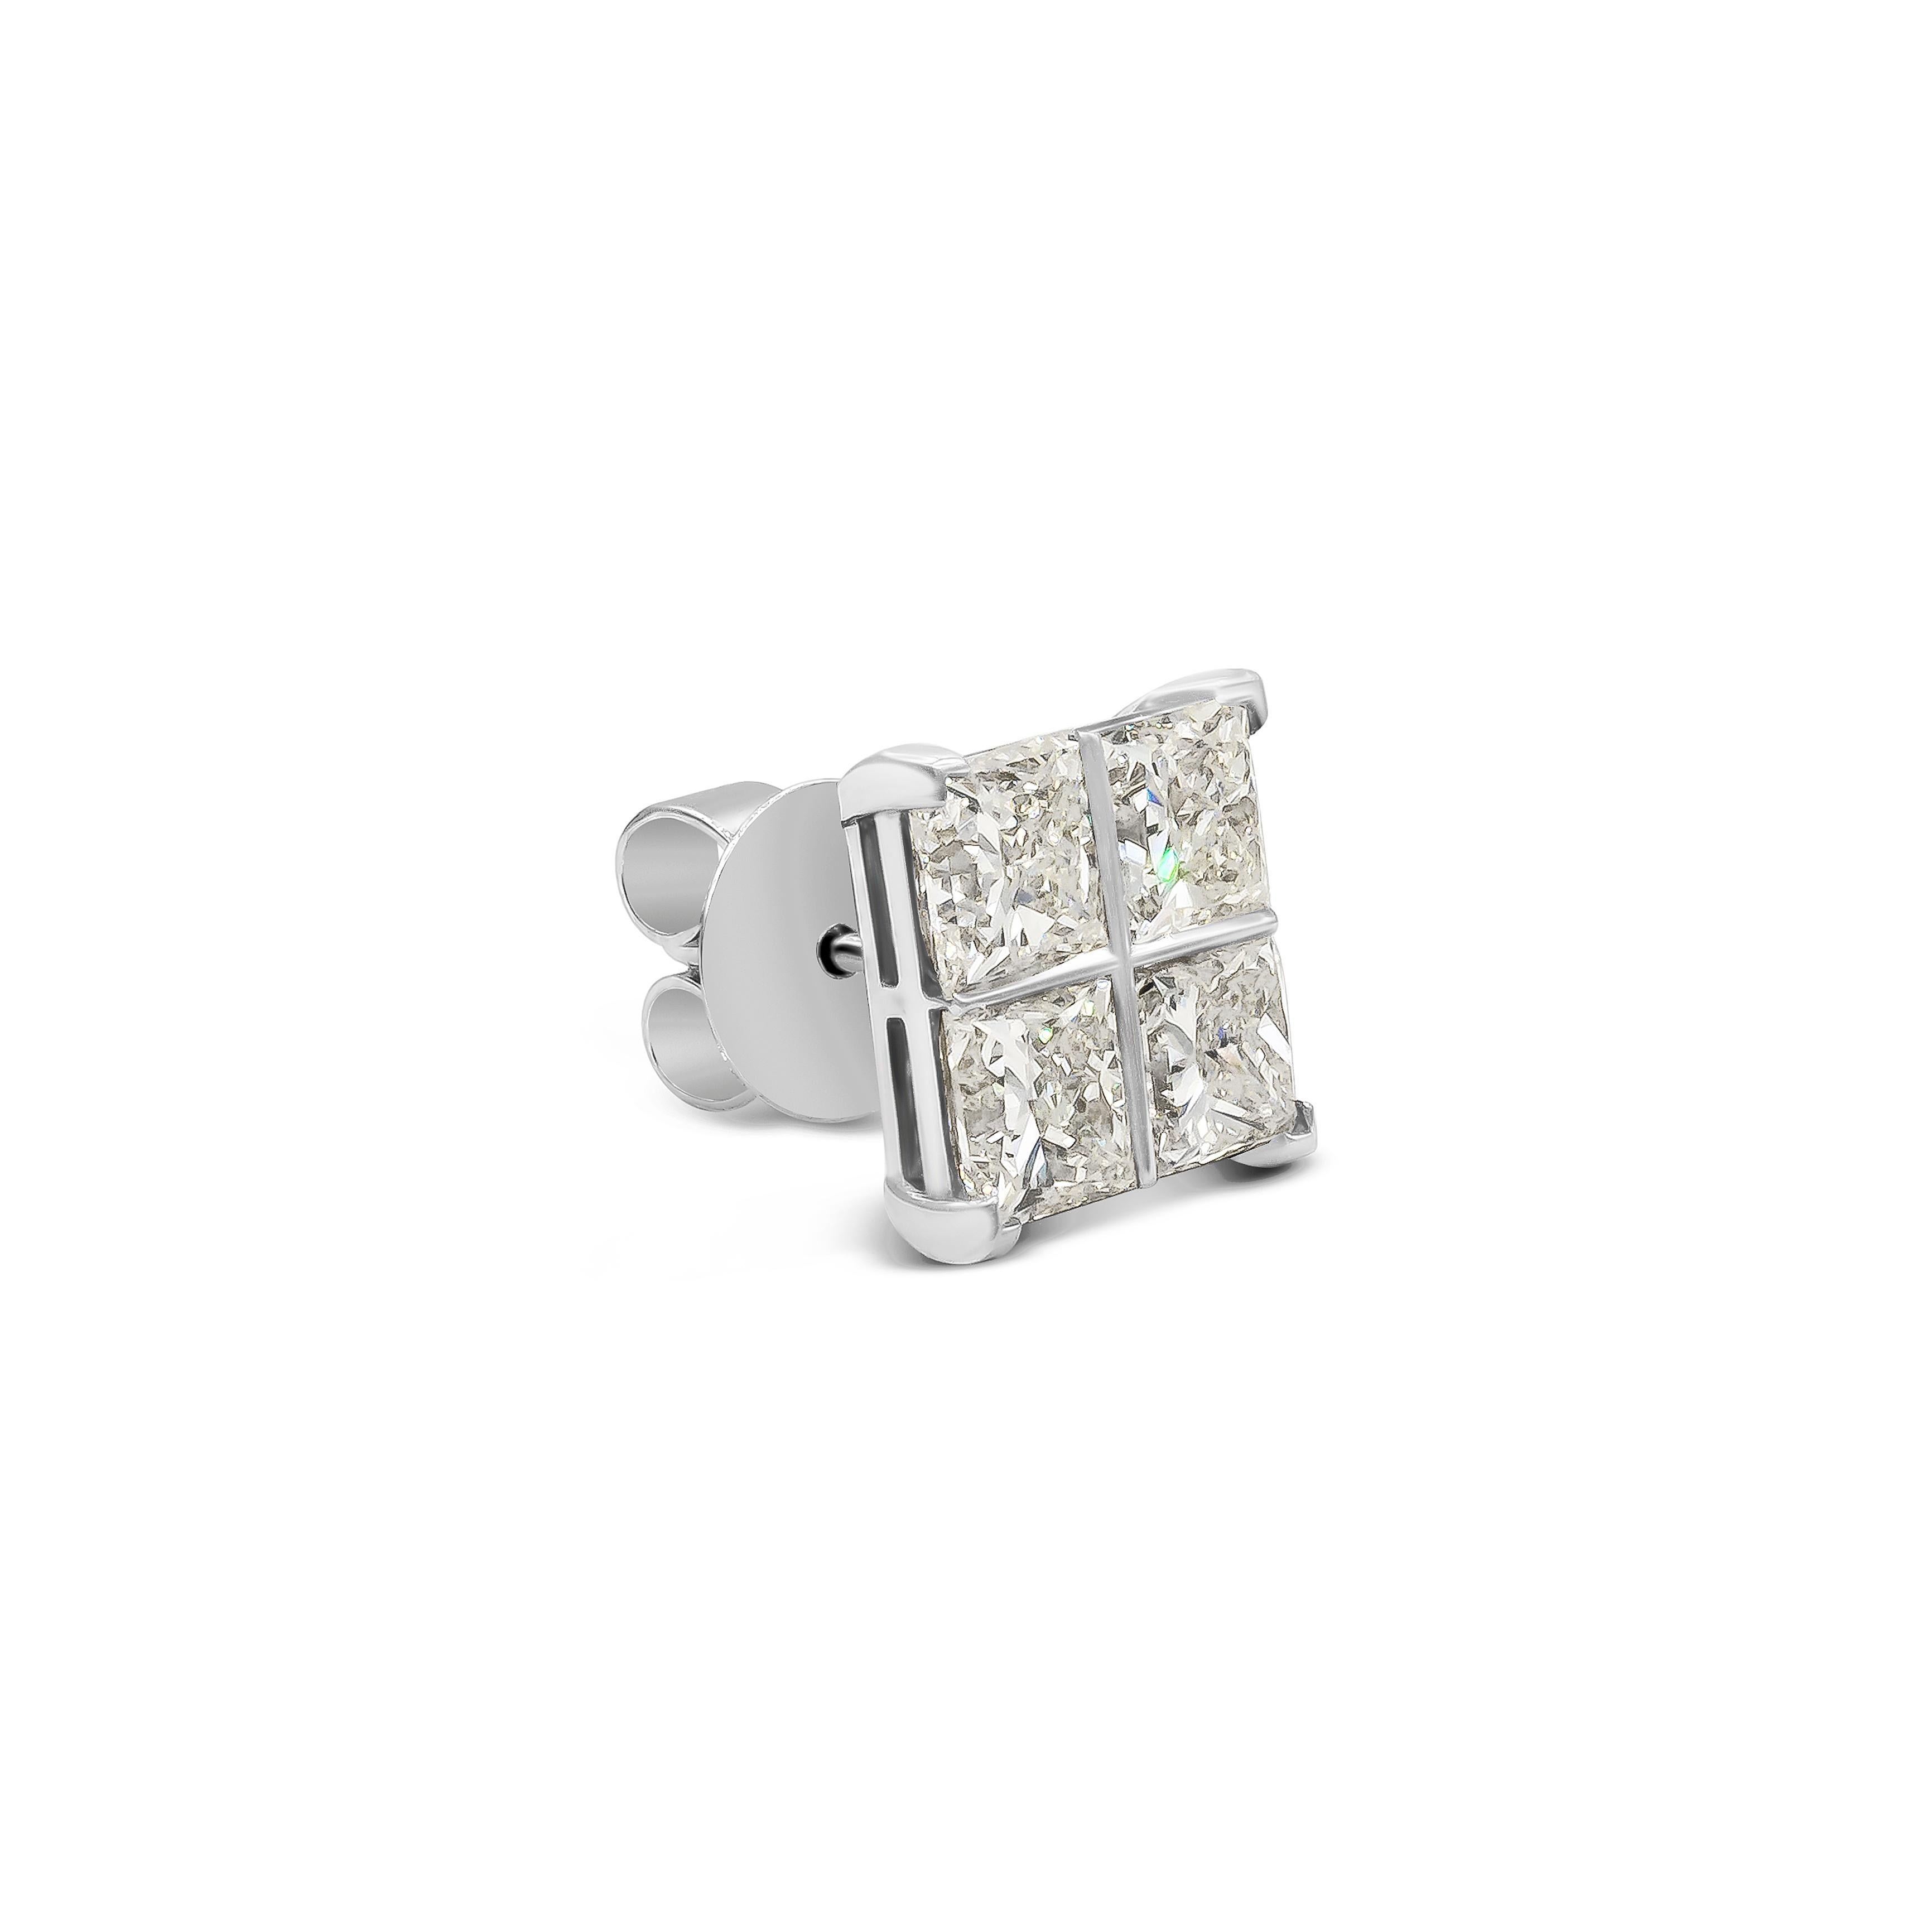 This pair of stud earrings feature 8 princess cut diamonds weighing 8.17 carats total, LM in color and VS+ in clarity.  Each earring has 4 diamonds set in such a way that it gives the impression of one large diamond earring. Set in 18K white gold.